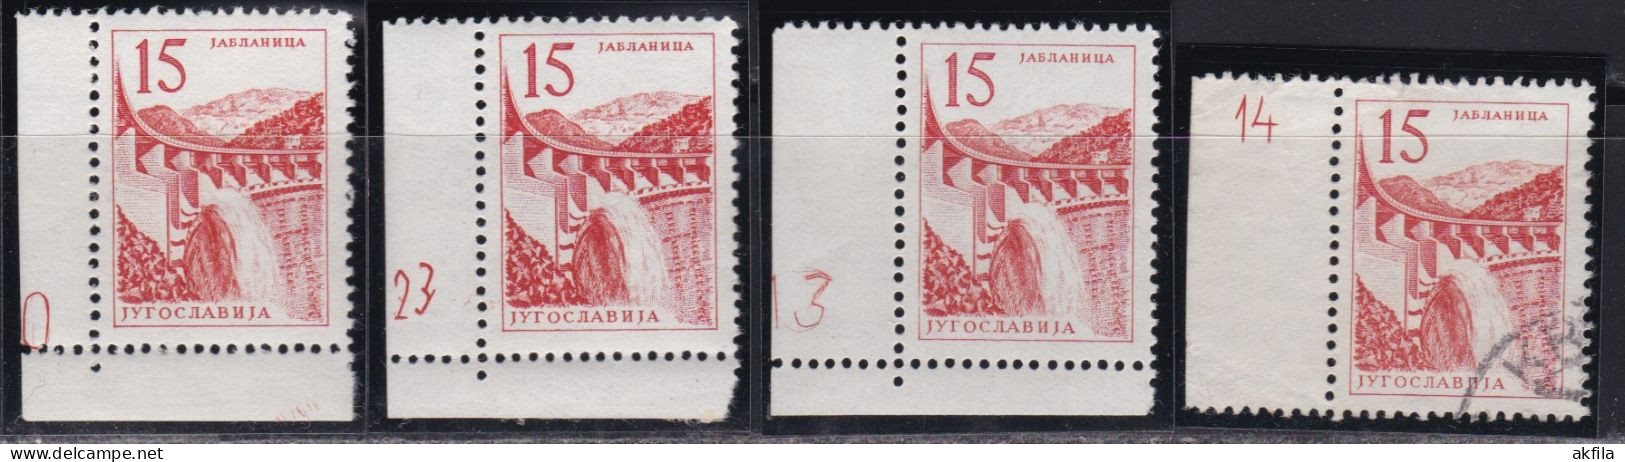 Yugoslavia 1958 Definitive Stamps With Printing Plate Markings, MNH And Used Michel 857. - Used Stamps